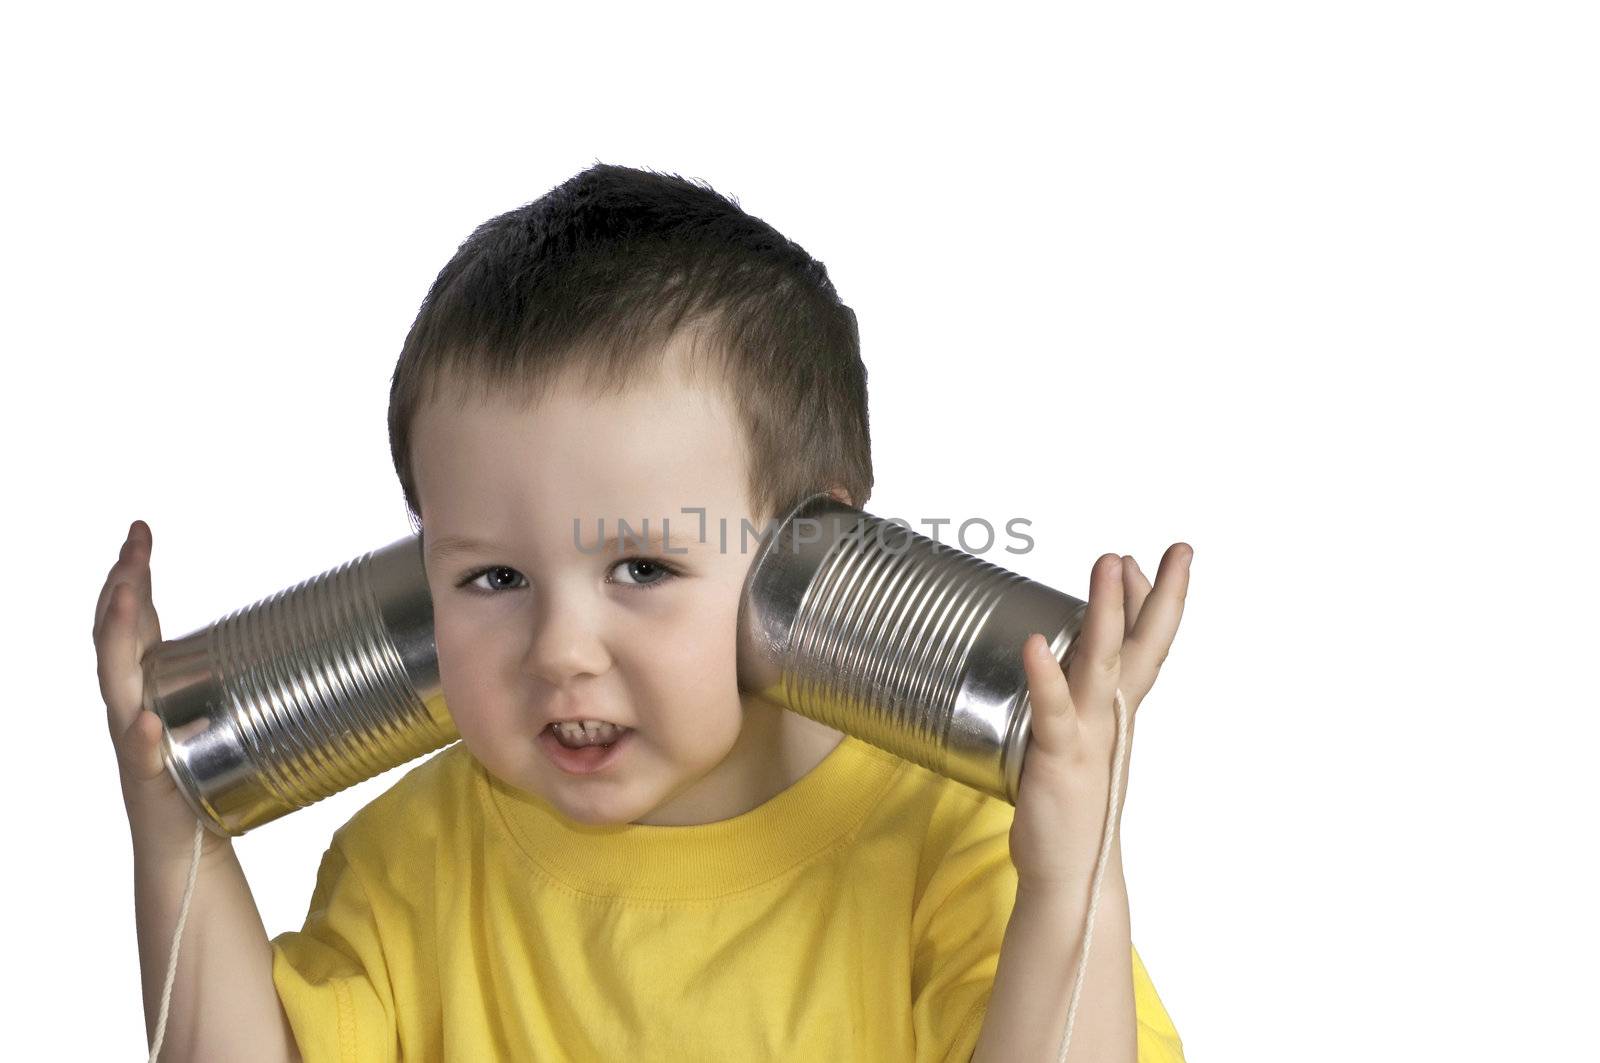 Baby trying to get some kind of reception from his home-made walkie-talkie system